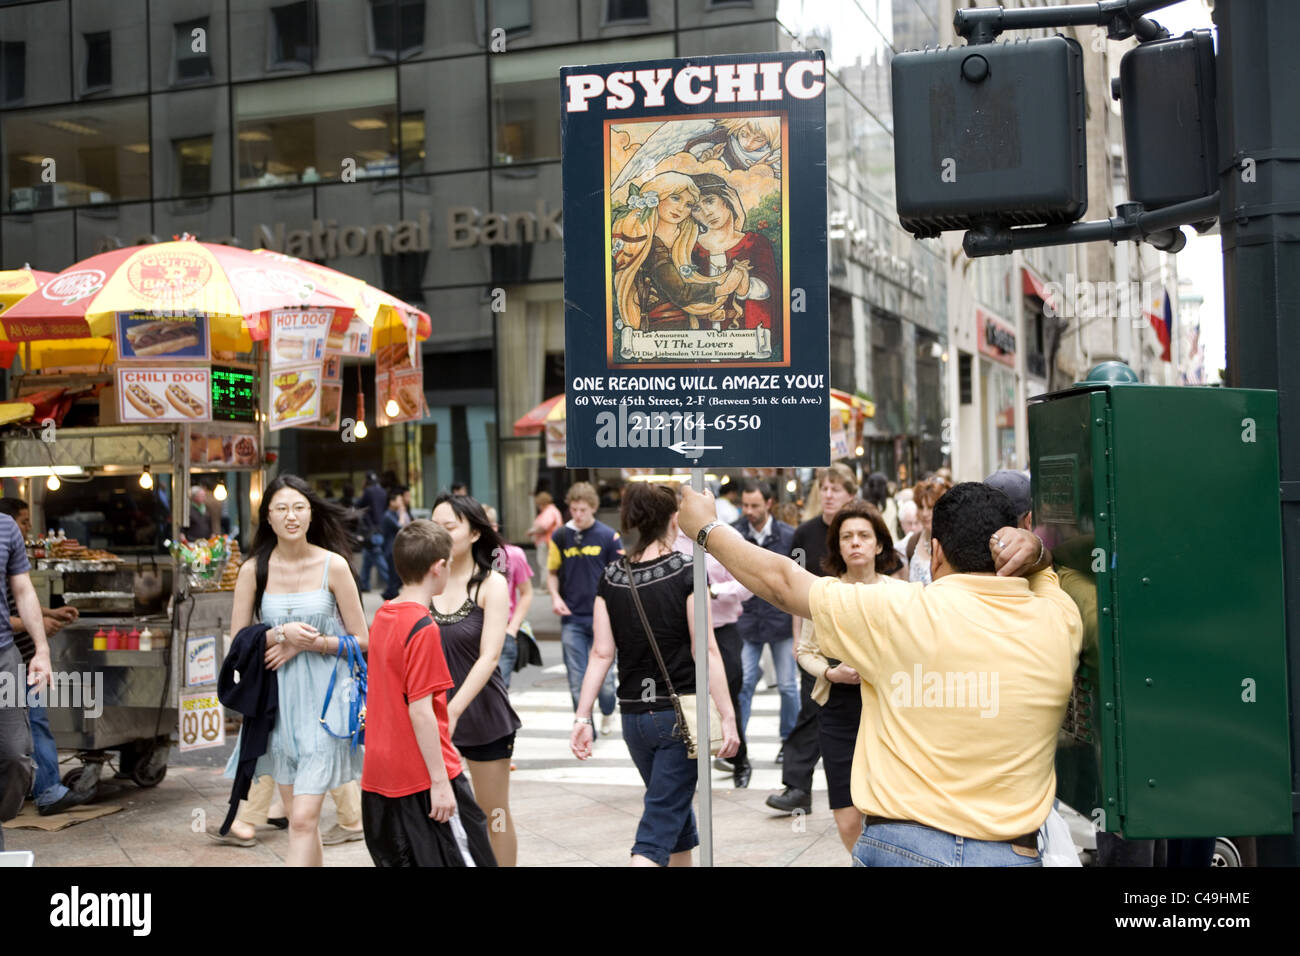 Psychic does street advertising along 5th Avenue in midtown Manhattan. In uncertain times fortune tellers flourish. Stock Photo